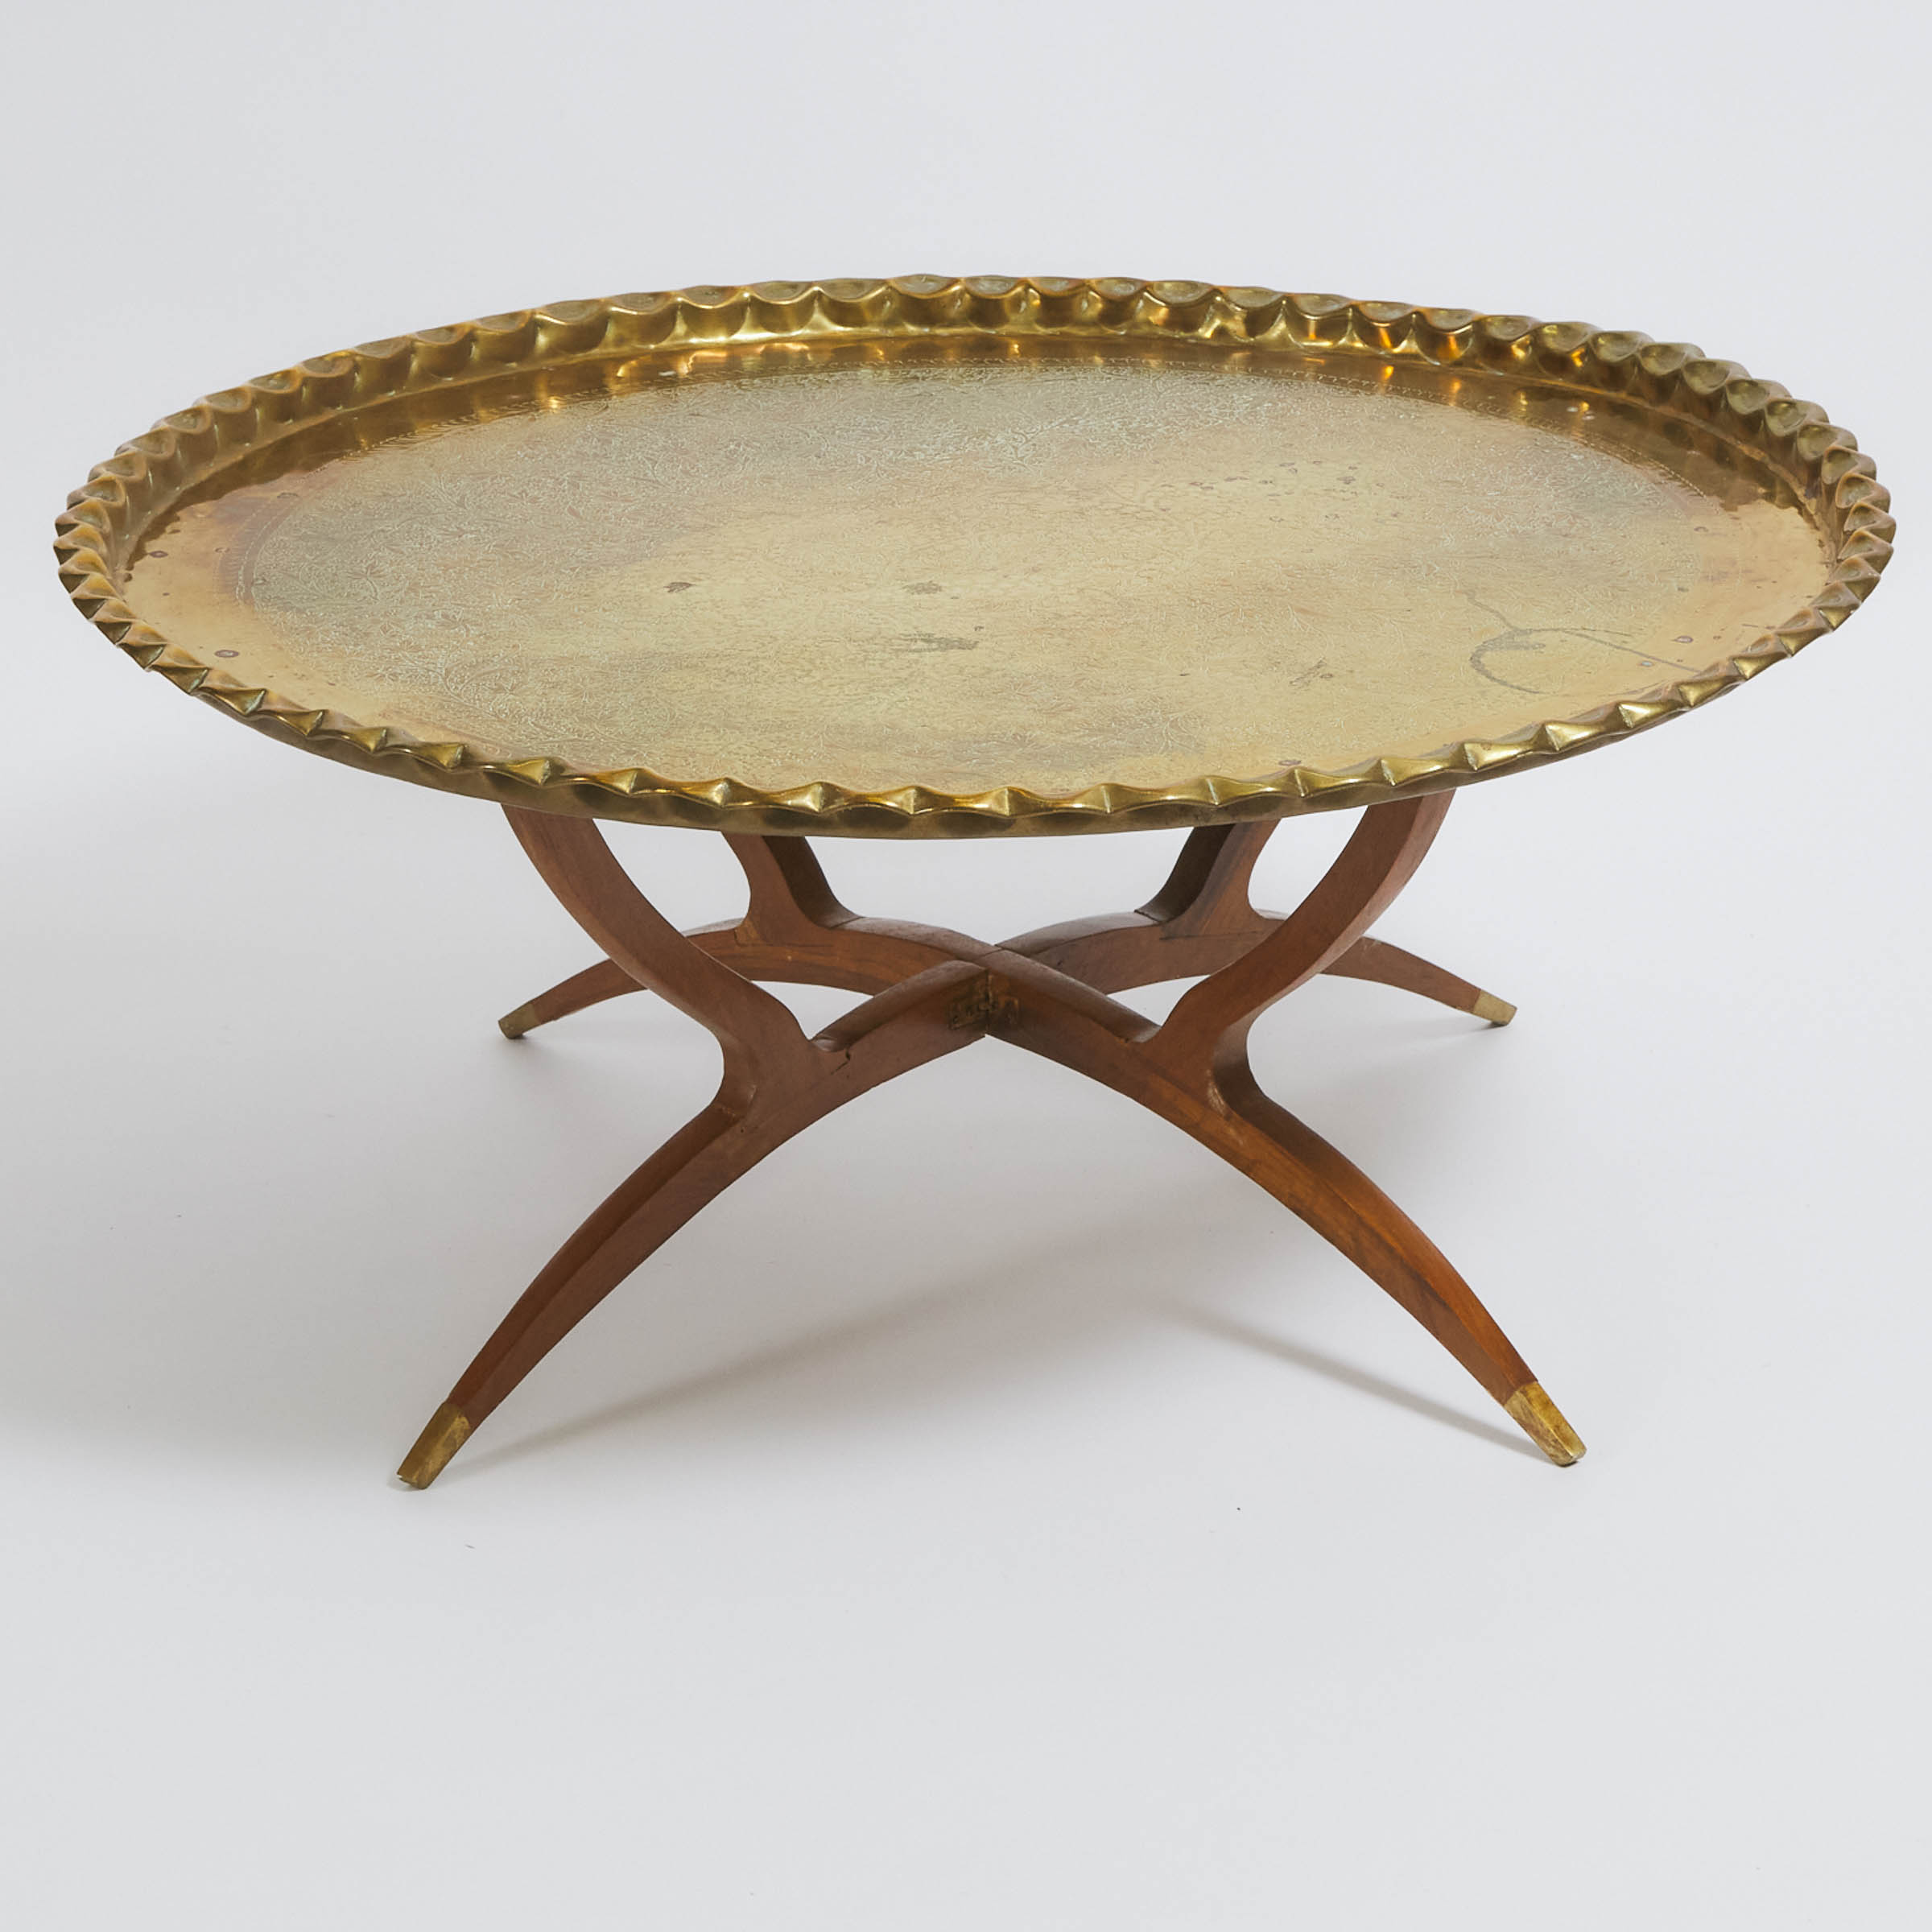 Indian Engraved Brass Tray Table 3aaec9